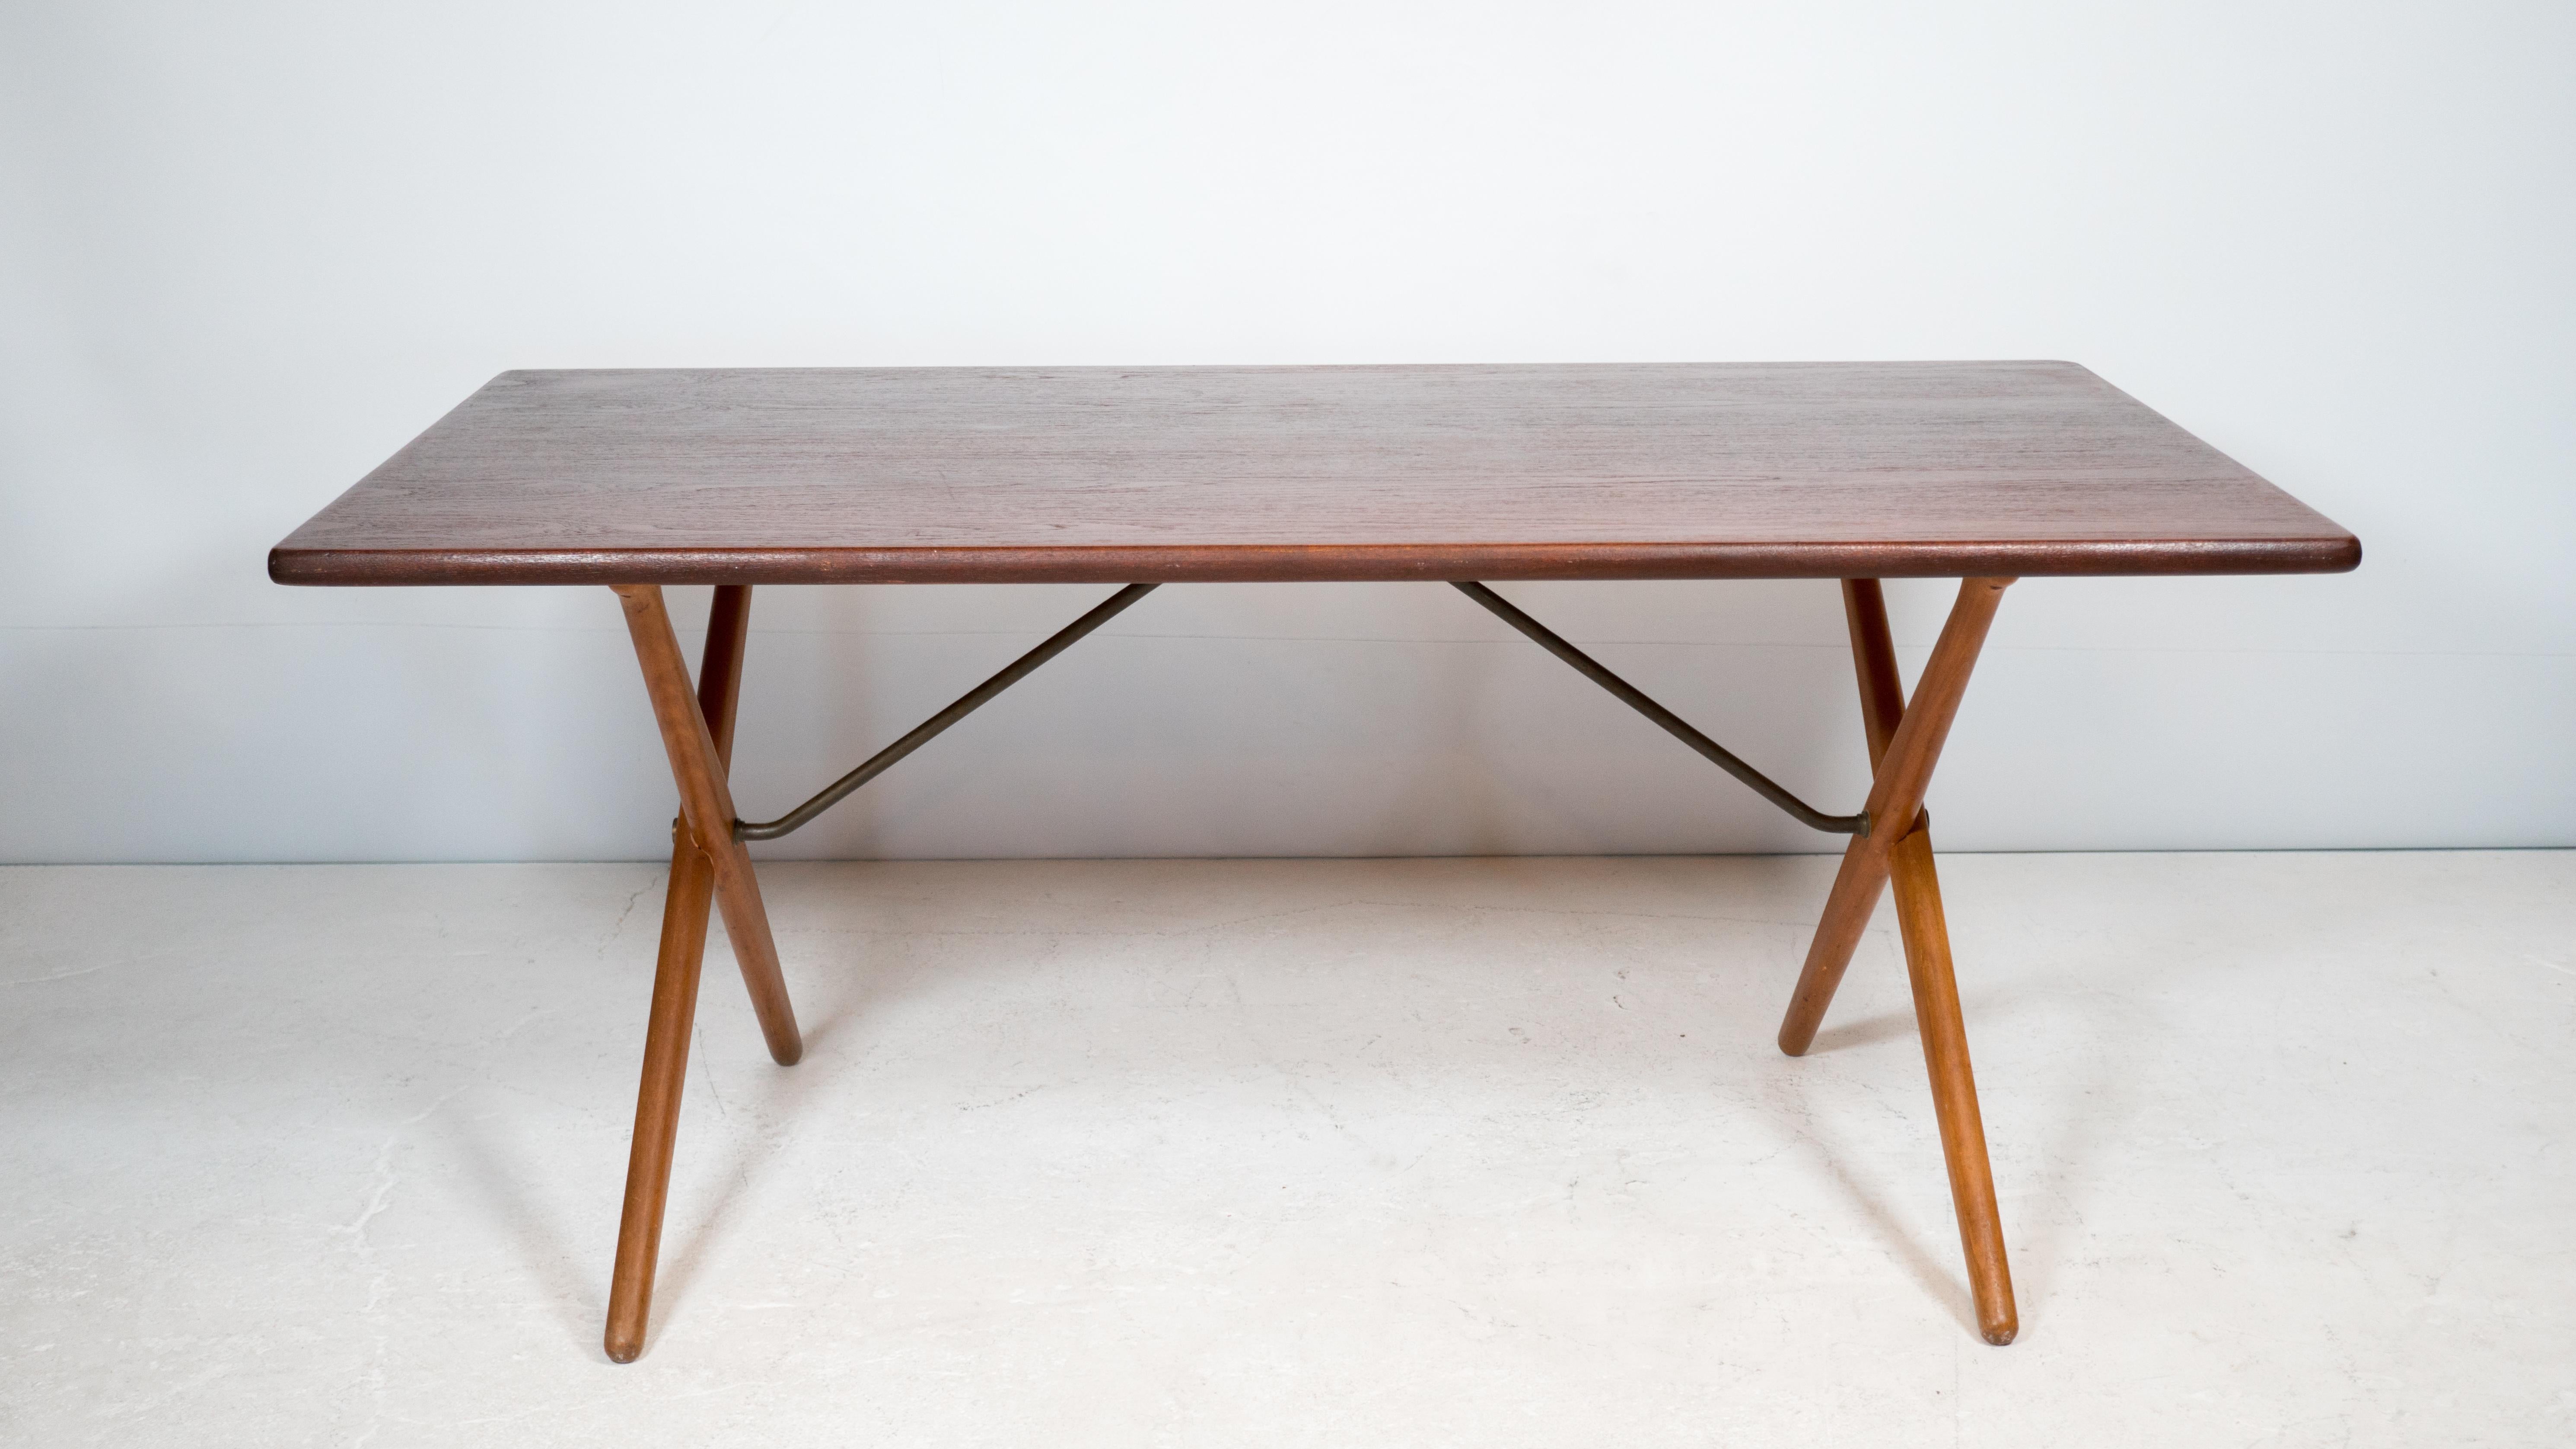 Hans Wegner 'AT-303' sawhorse table designed for Andreas Tuck, 1950s. Floating table top with tubular brass stem supporting cross-shaped legs. Minimal Scandinavian design with focus on form and function. Suitable usage as a desk. Good vintage